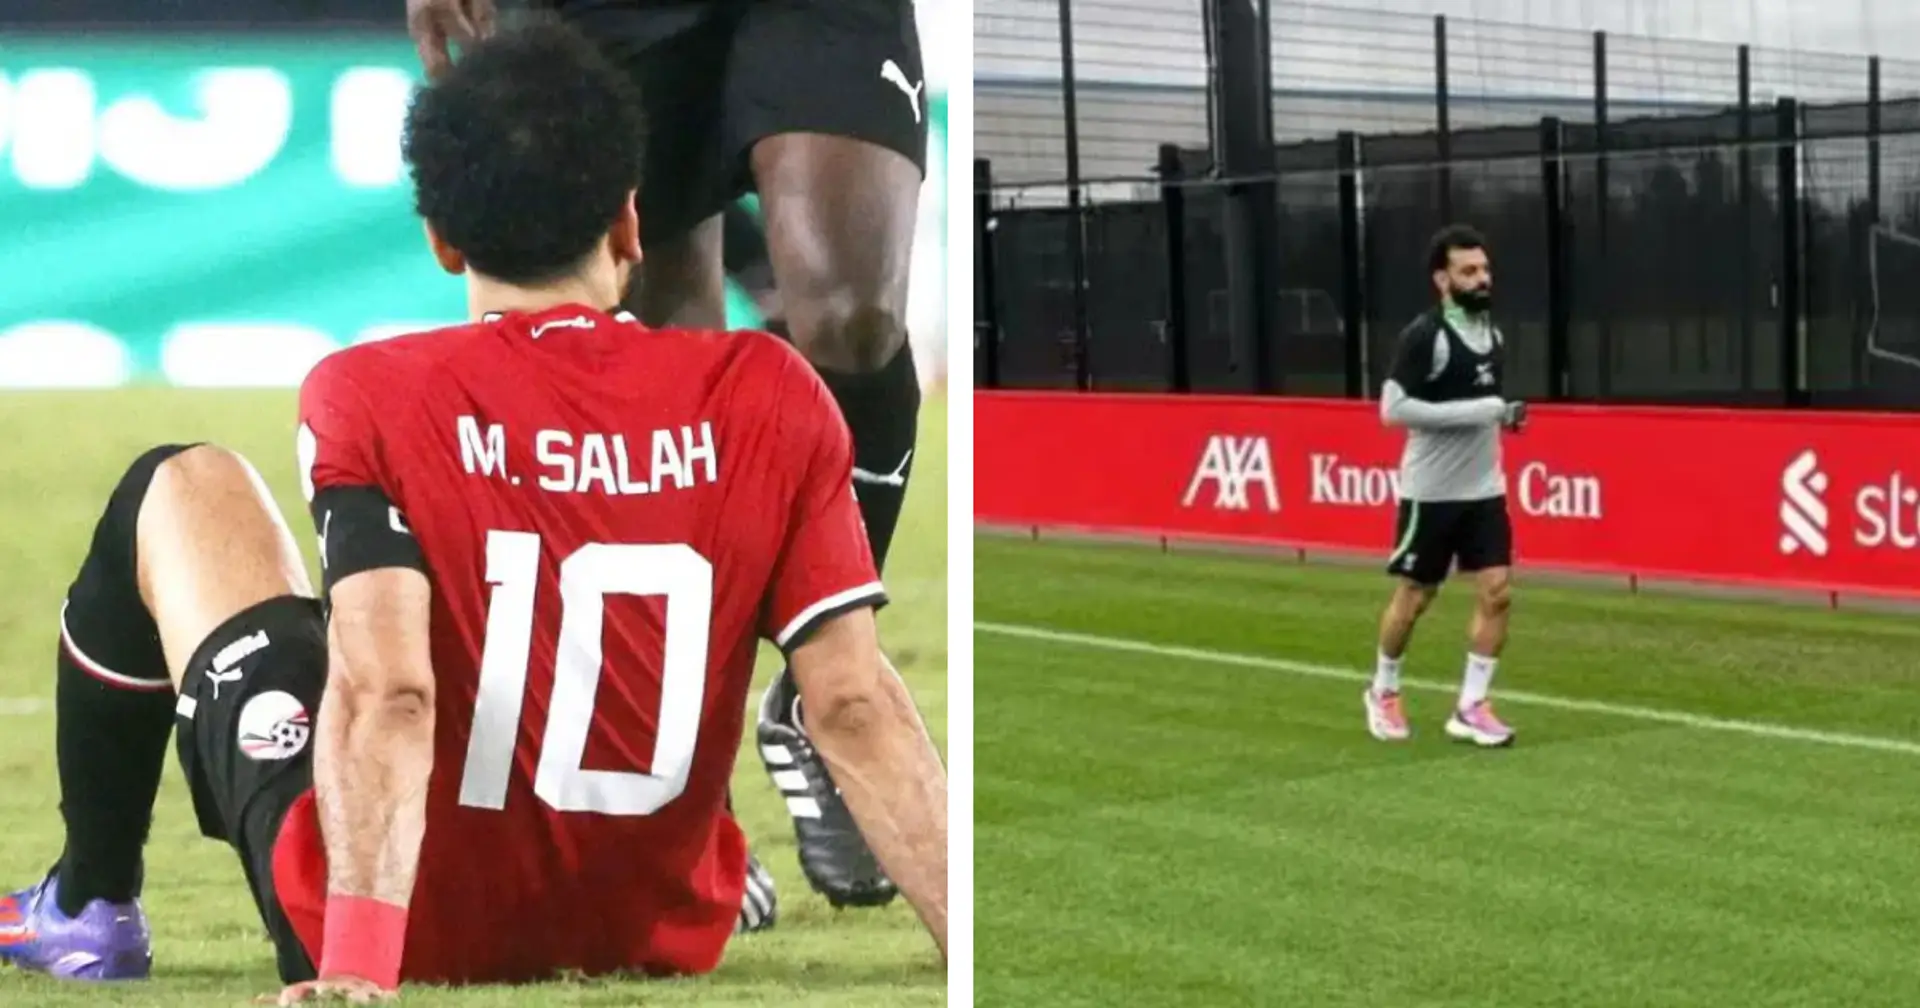 Mohamed Salah back on the grass for first time after hamstring injury